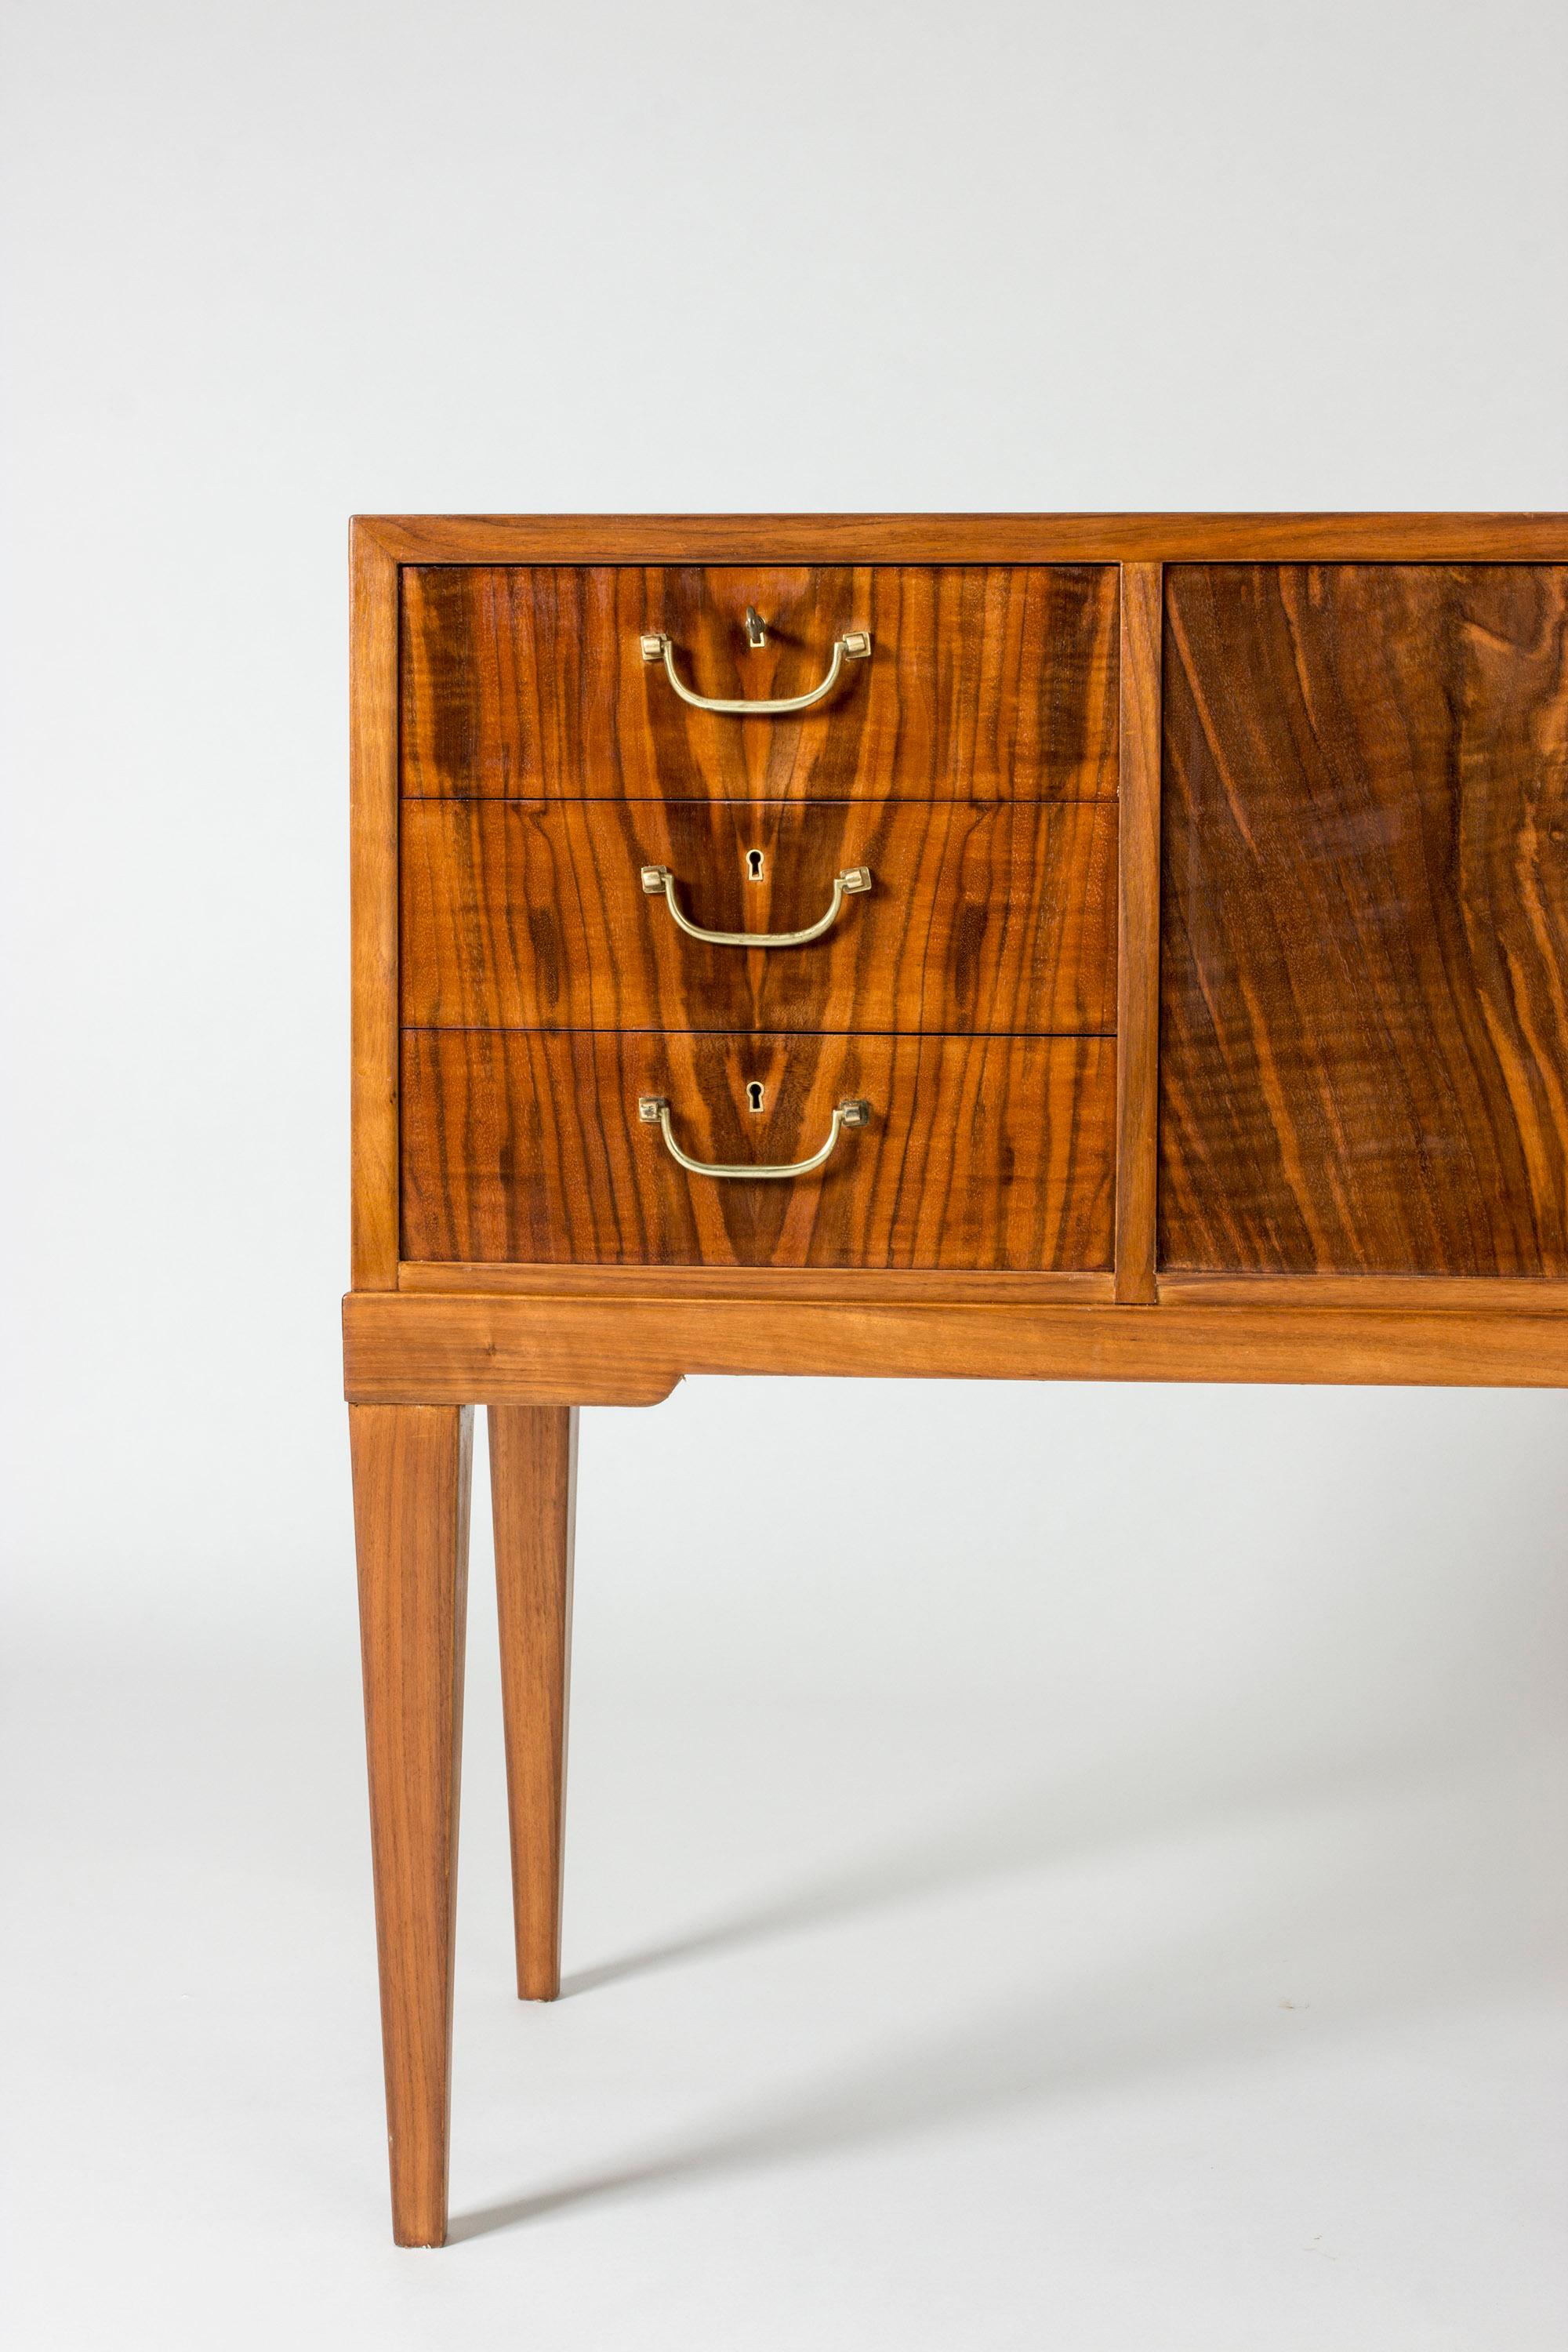 Mid-20th Century Swedish Grace Mahogany Inlaid Sideboard/Credenza by Mobilia, Sweden, 1940s